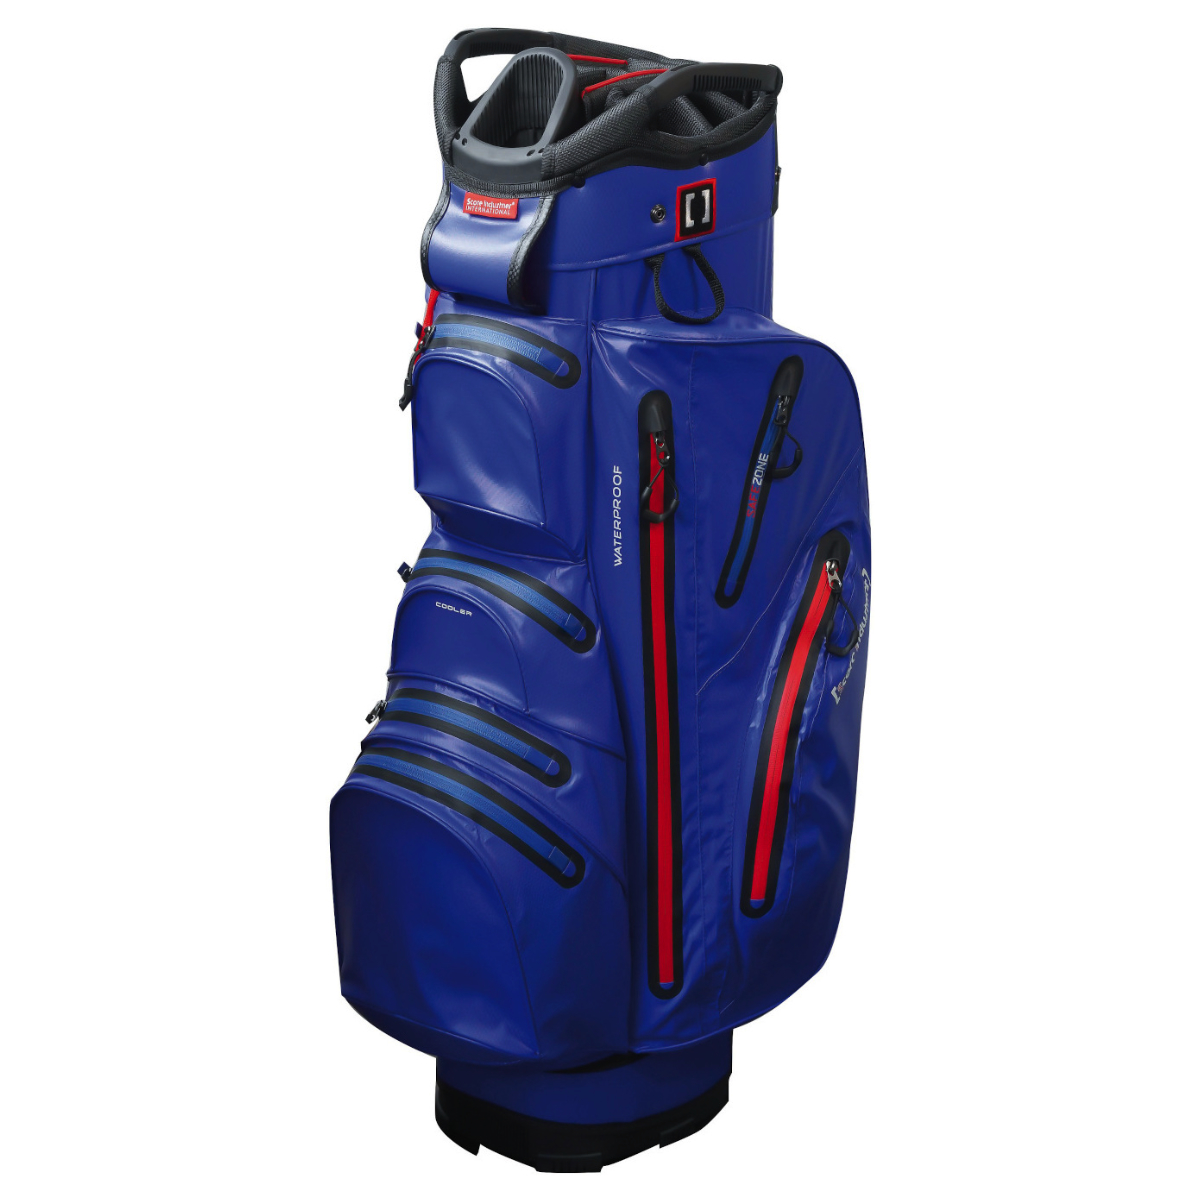 Score Industries H 388 Bright Blue/Red Cartbag